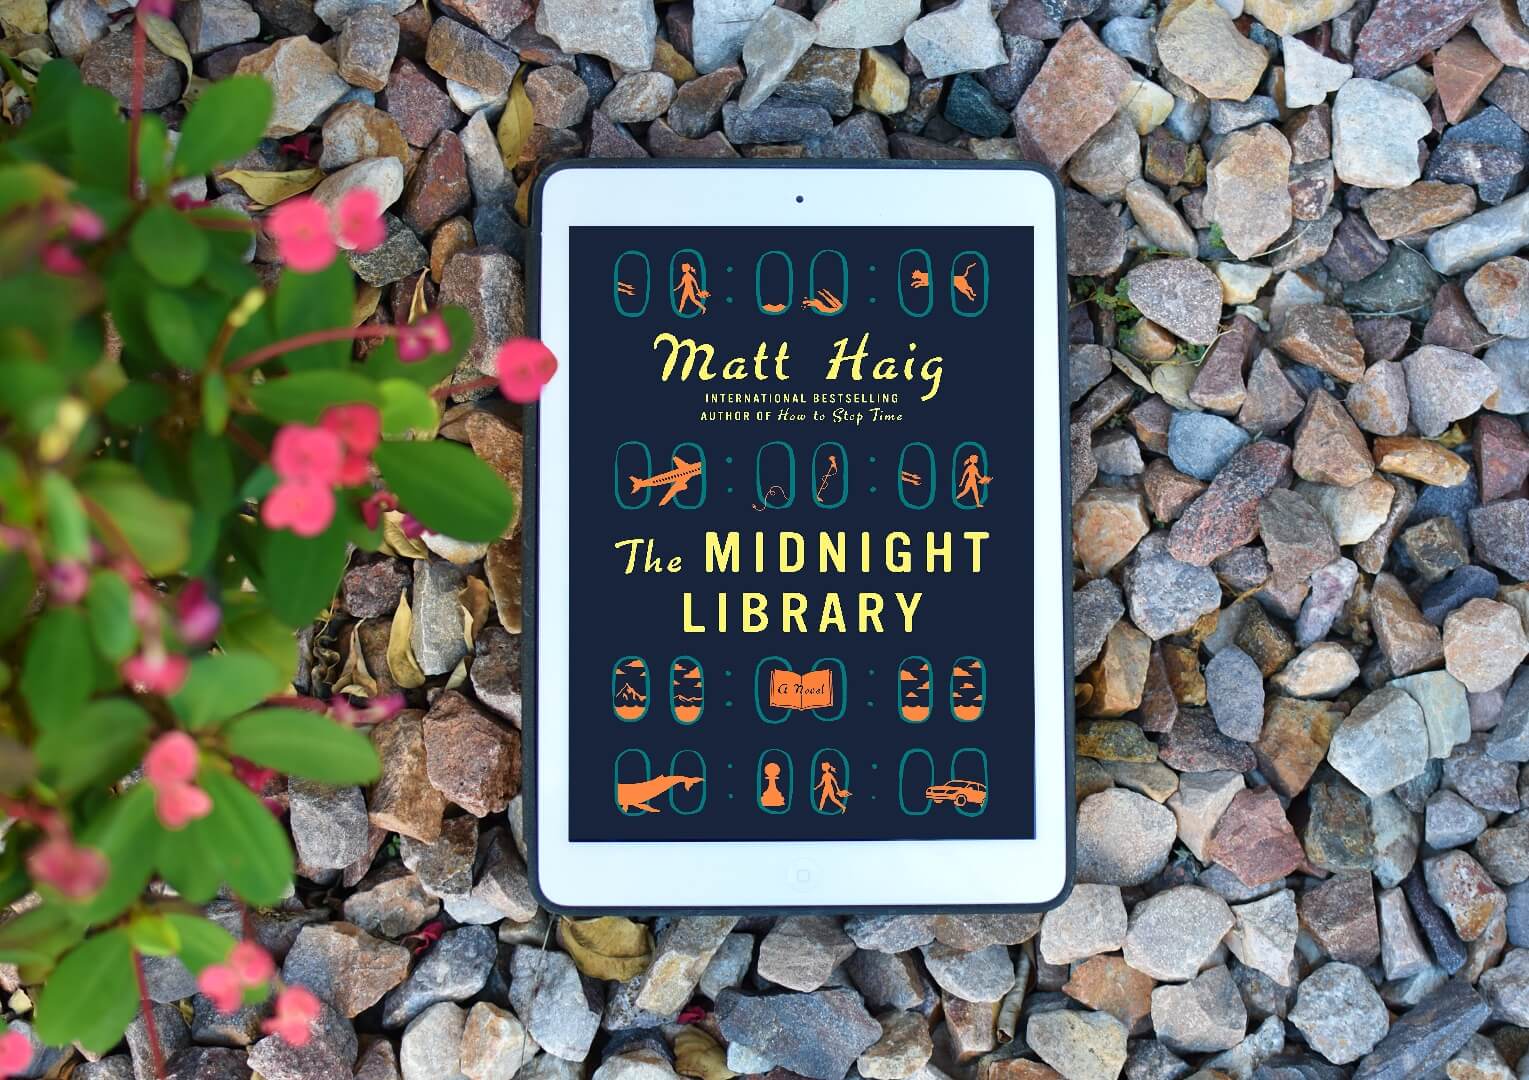 Review: The Midnight Library by Matt Haig